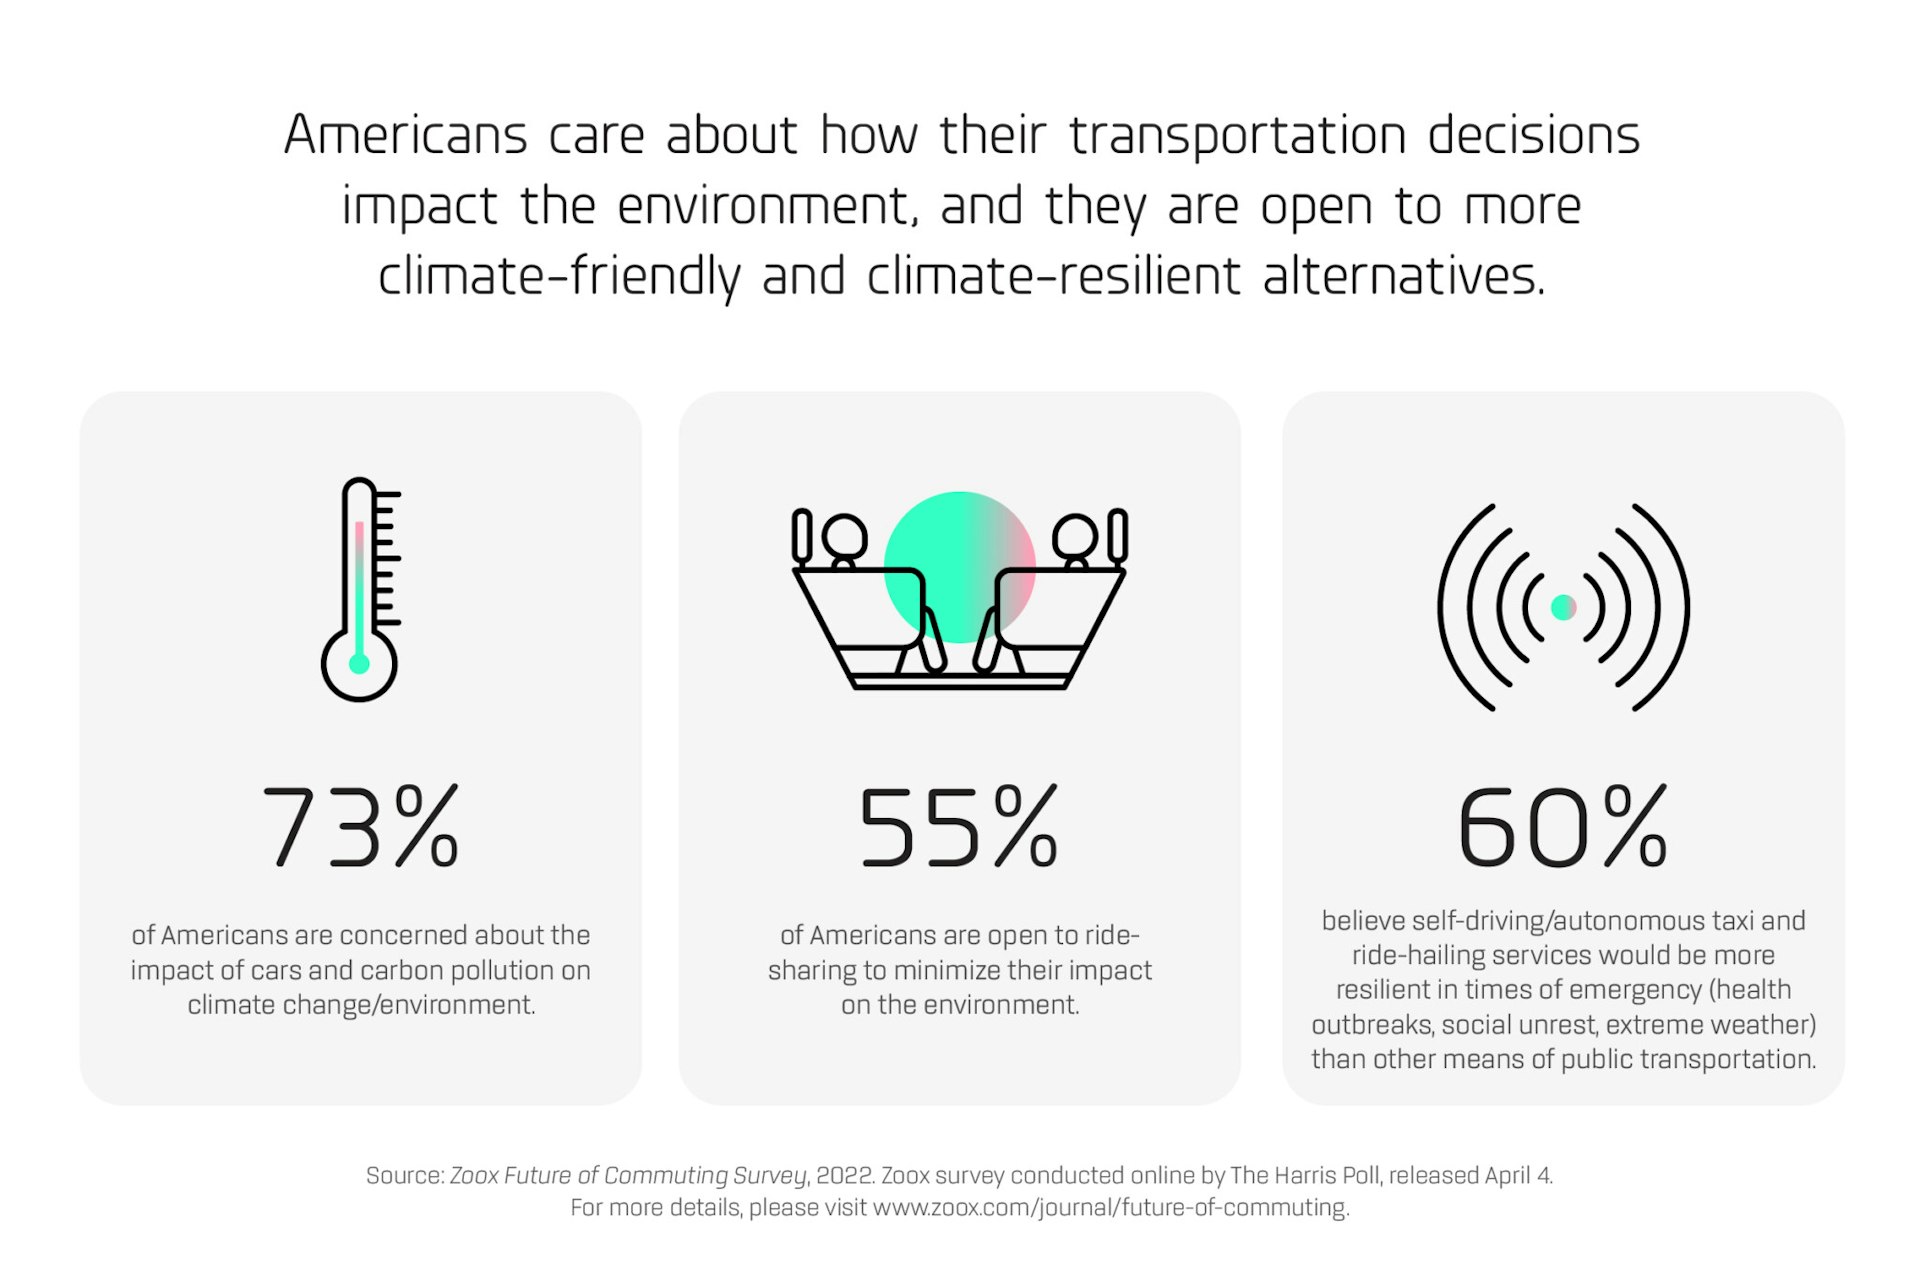 This image is an infographic from a survey about the future of transportation and commuting conducted by autonomous vehicle company, Zoox, and market research firm, the Harris Poll. This infographic shows the results of three questions about the impact of various forms of transportation on the environment. The infographic includes three columns that each have an illustration at the top of the column, a percentage in the middle of the column, and a written description at the bottom of the column. At the bottom of the infographic there are directions to visit www.zoox.com/journal/future-of-commuting for more information. The first column has an illustration of a weather thermometer that is reaching a hot temperature. It includes the stat: 73% of Americans are concerned about the impact of cars and carbon pollution on climate change/environment. The second column has an illustration of two faceless people sitting in two seats facing each other. A green circle is drawn in the middle of the illustration. It includes the stat: 55% of Americans are open to ride-sharing to minimize their impact on the environment. The third column has an illustration of a green dot with multiple curves in increasing size on the left and right side of the dot. This is made to look like sound waves from an emergency siren. It includes the stat: 60% believe self-driving/autonomous taxi and ride-hailing services would be more resilient in times of emergency (health outbreaks, social unrest, extreme weather) than other means of public transportation.